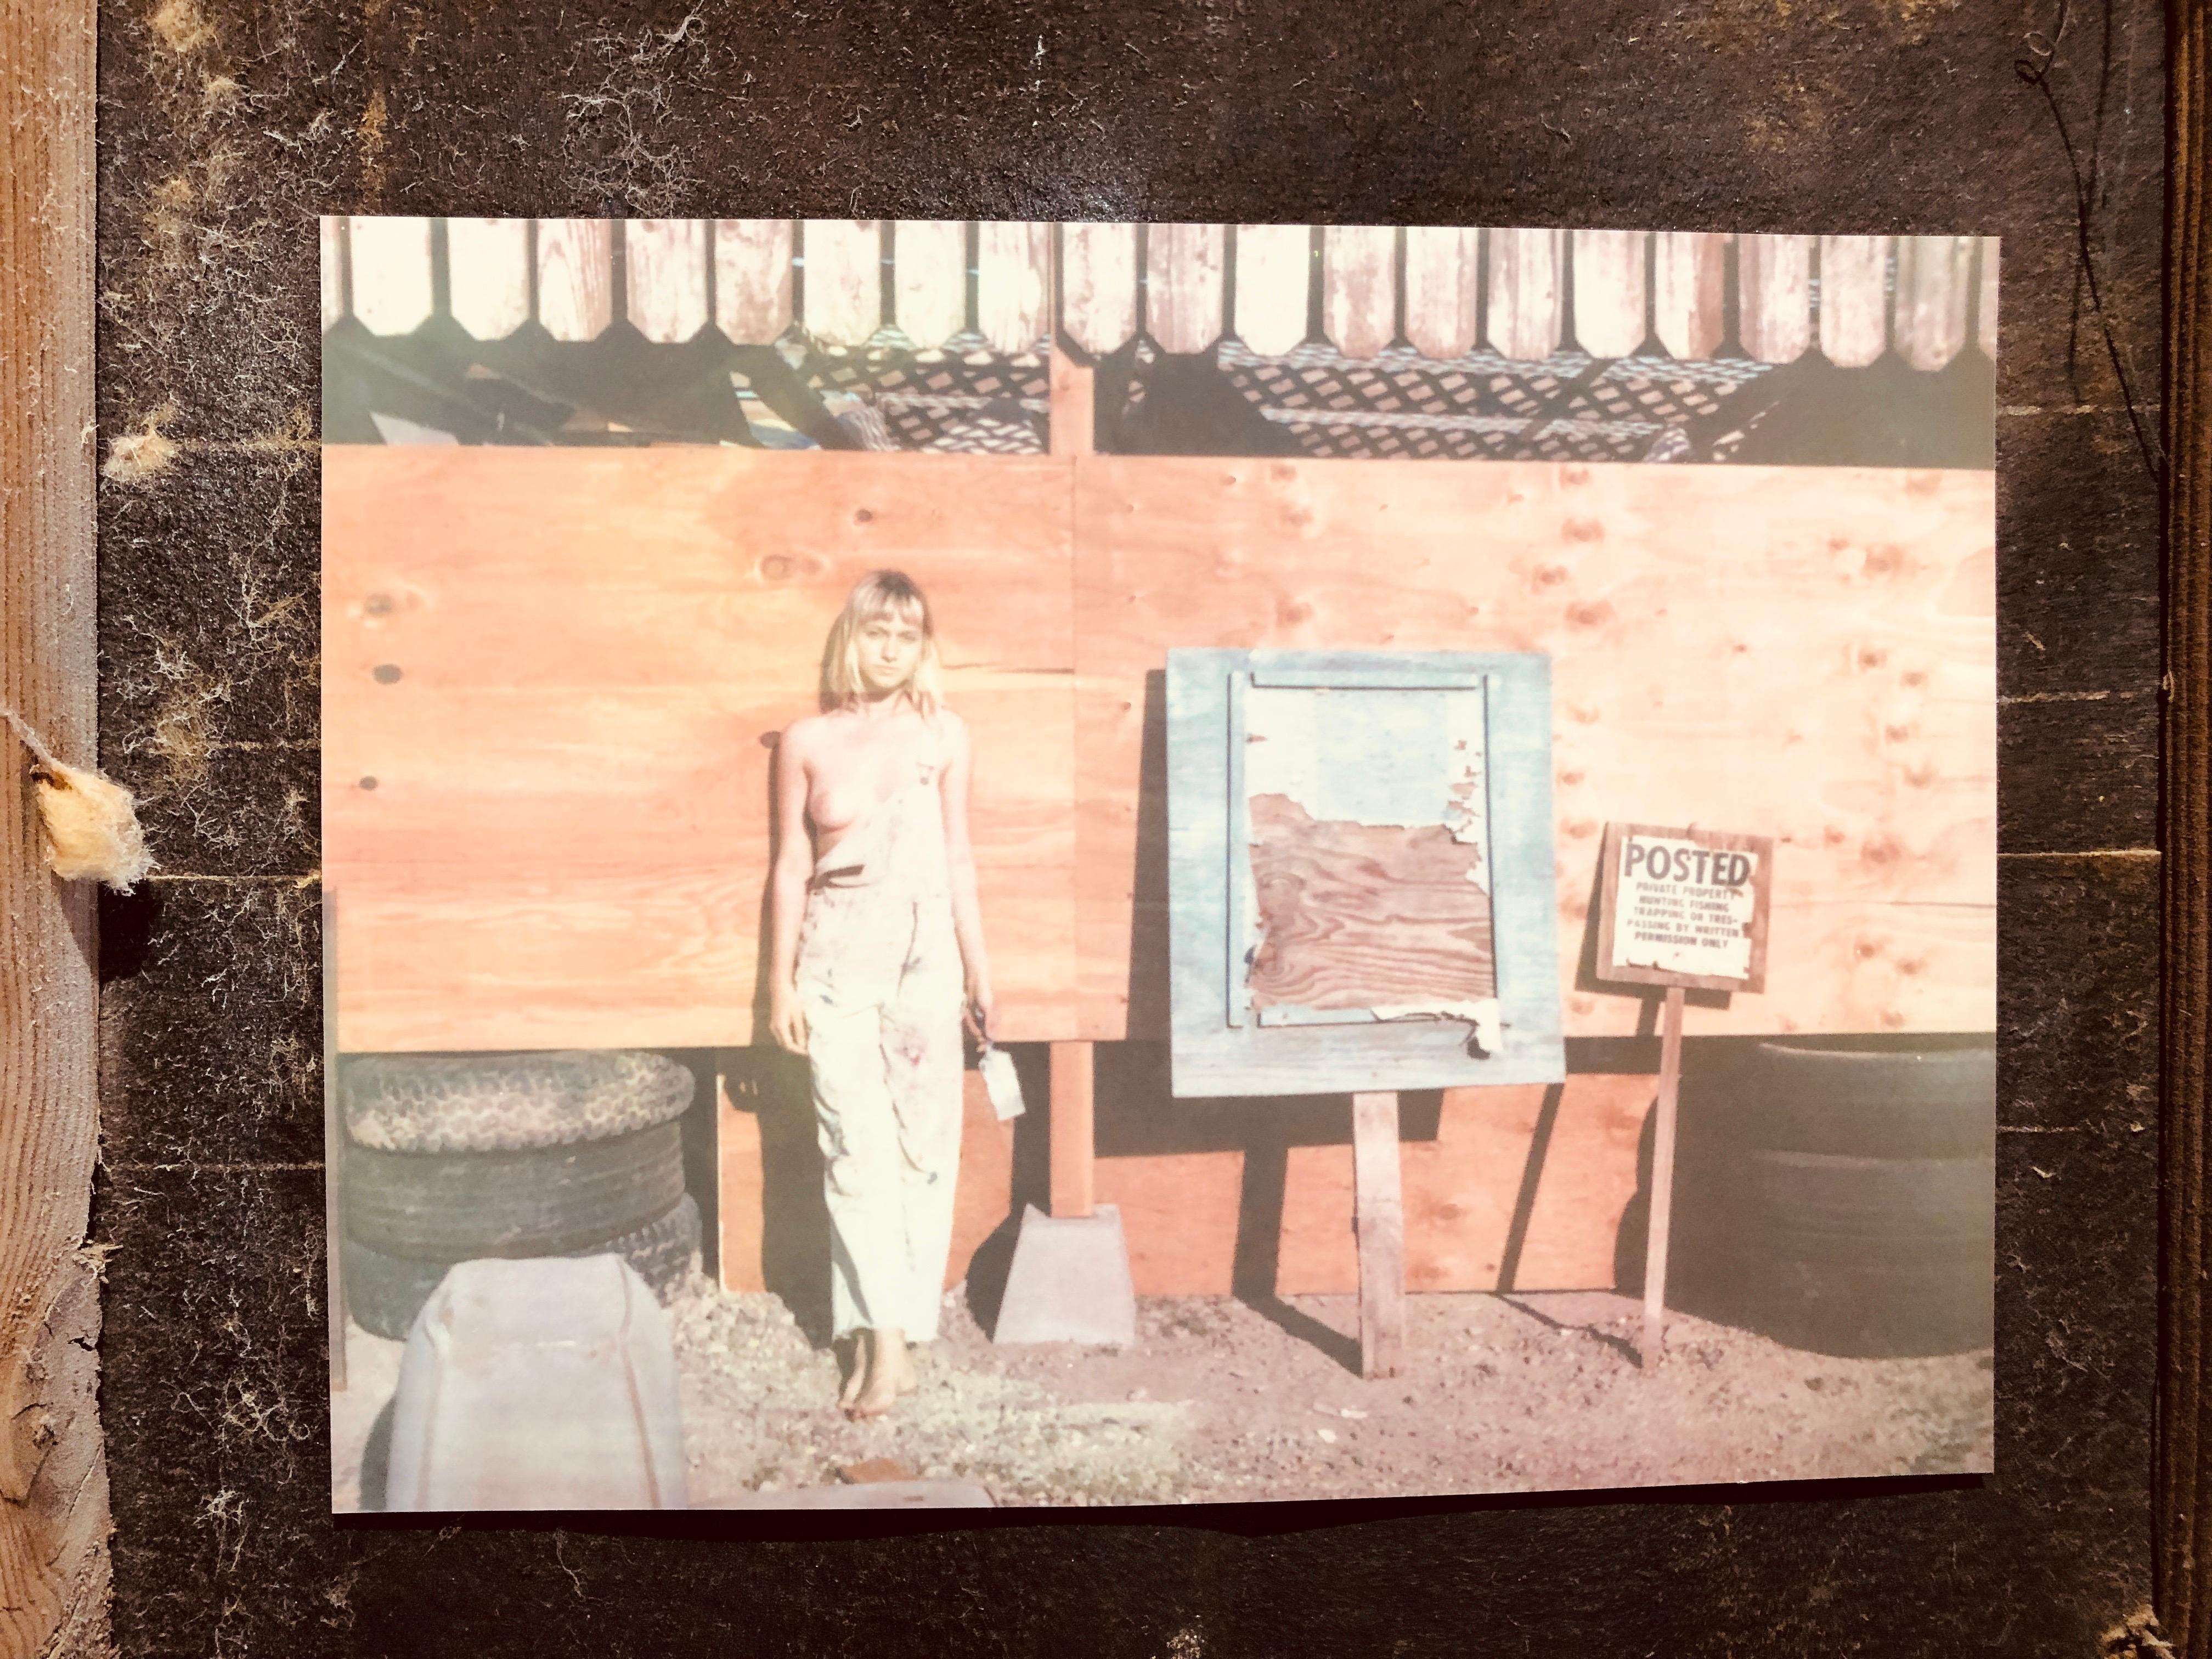 'A Portrait of the Artist as a Young Woman' part of the series 'A Girl Called N.' - 2019

40x48cm, 
Edition of 7 plus 2 Artist Proofs. 
Archival C-Print based on a Polaroid. 
Signature label and certificate. 
Artist inventory PL2019 - 564. 
Not